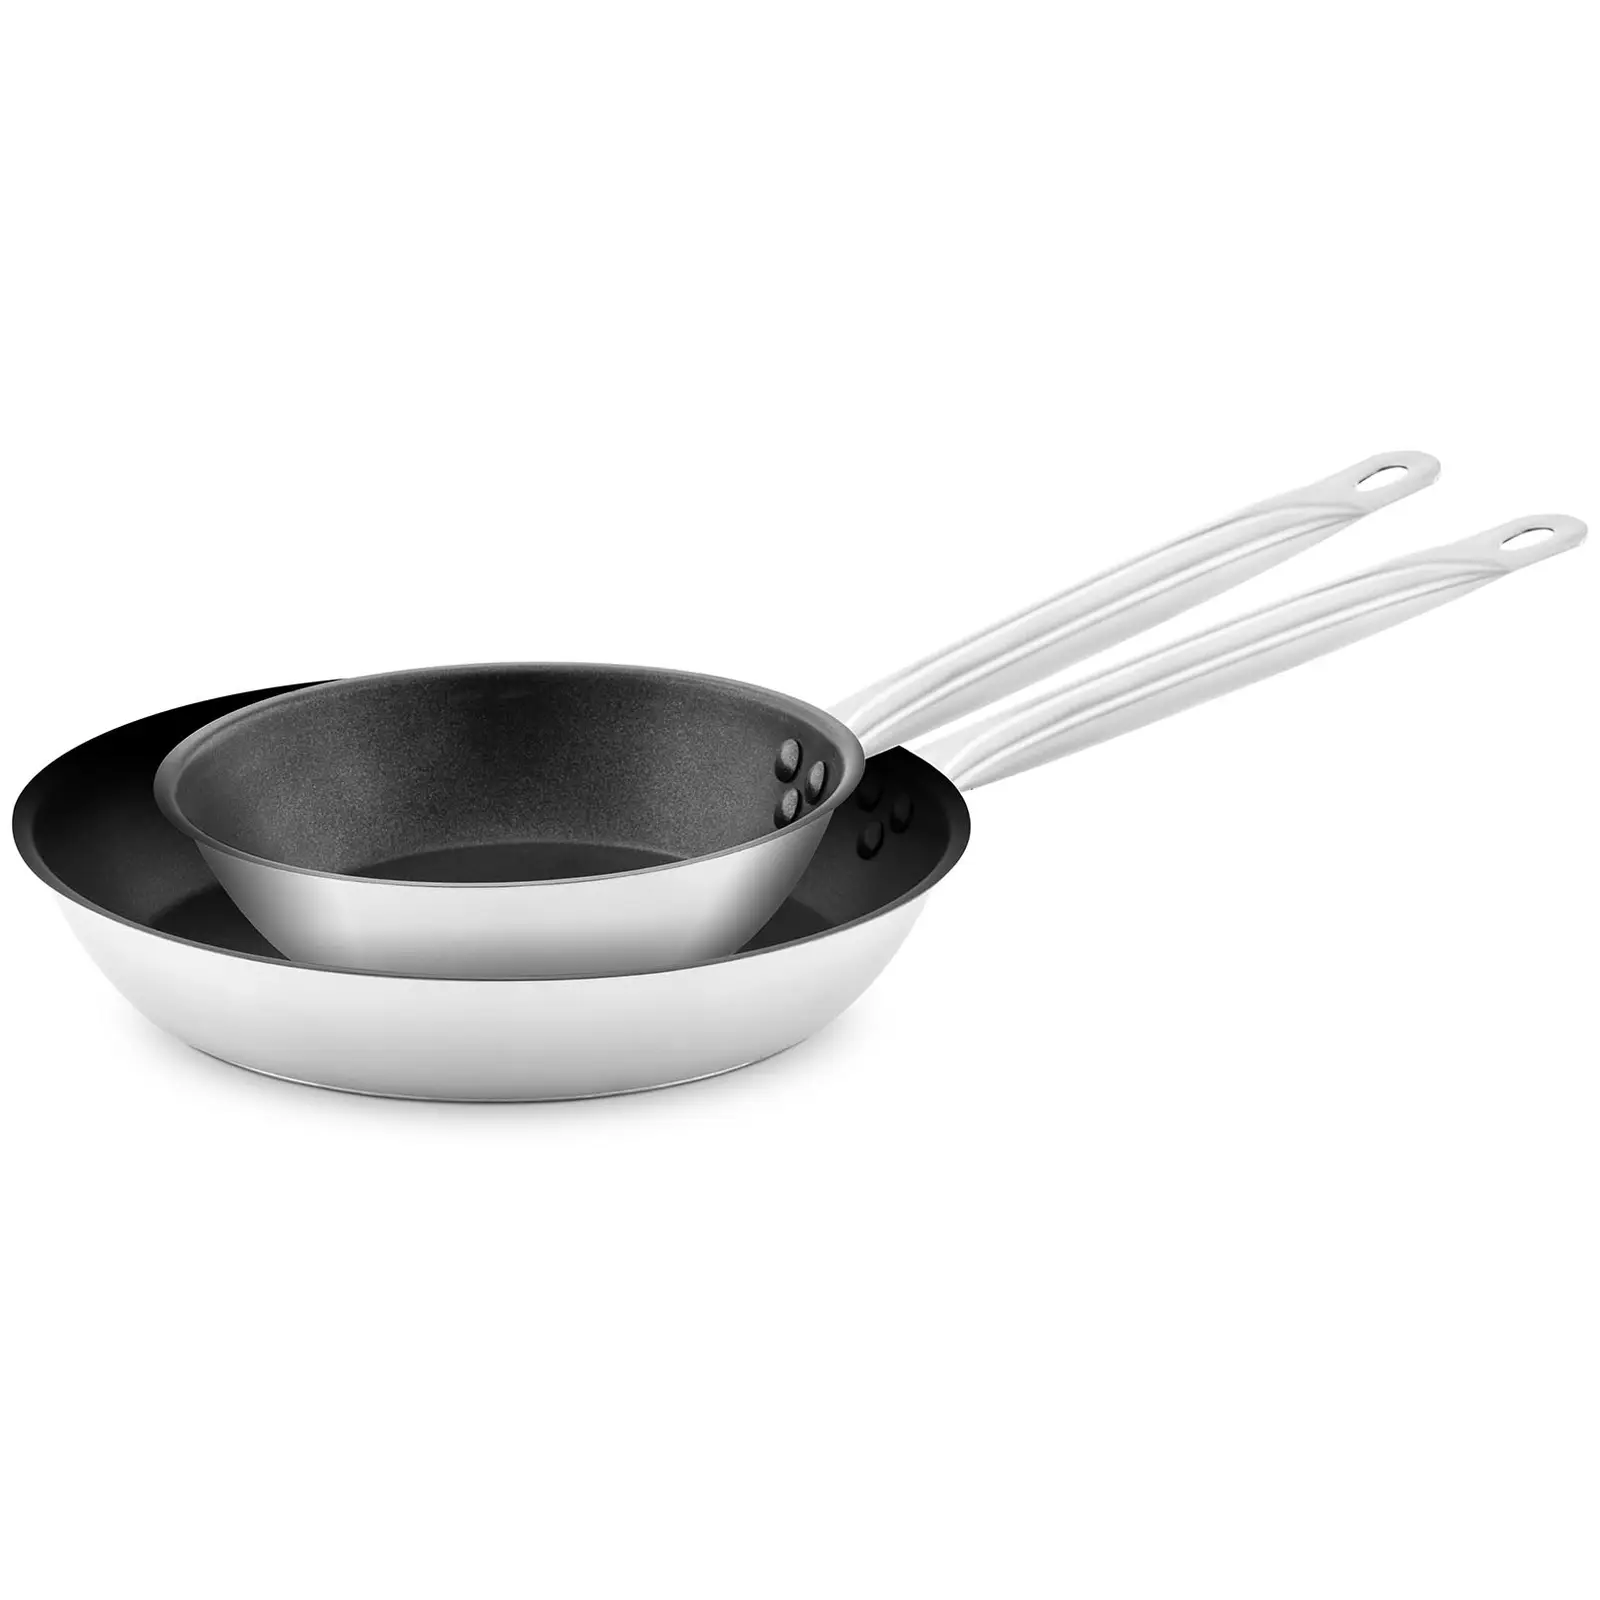 Stainless Steel Frying Pan - 2 pcs. - coated - Ø 20 / 28 cm x 5 cm